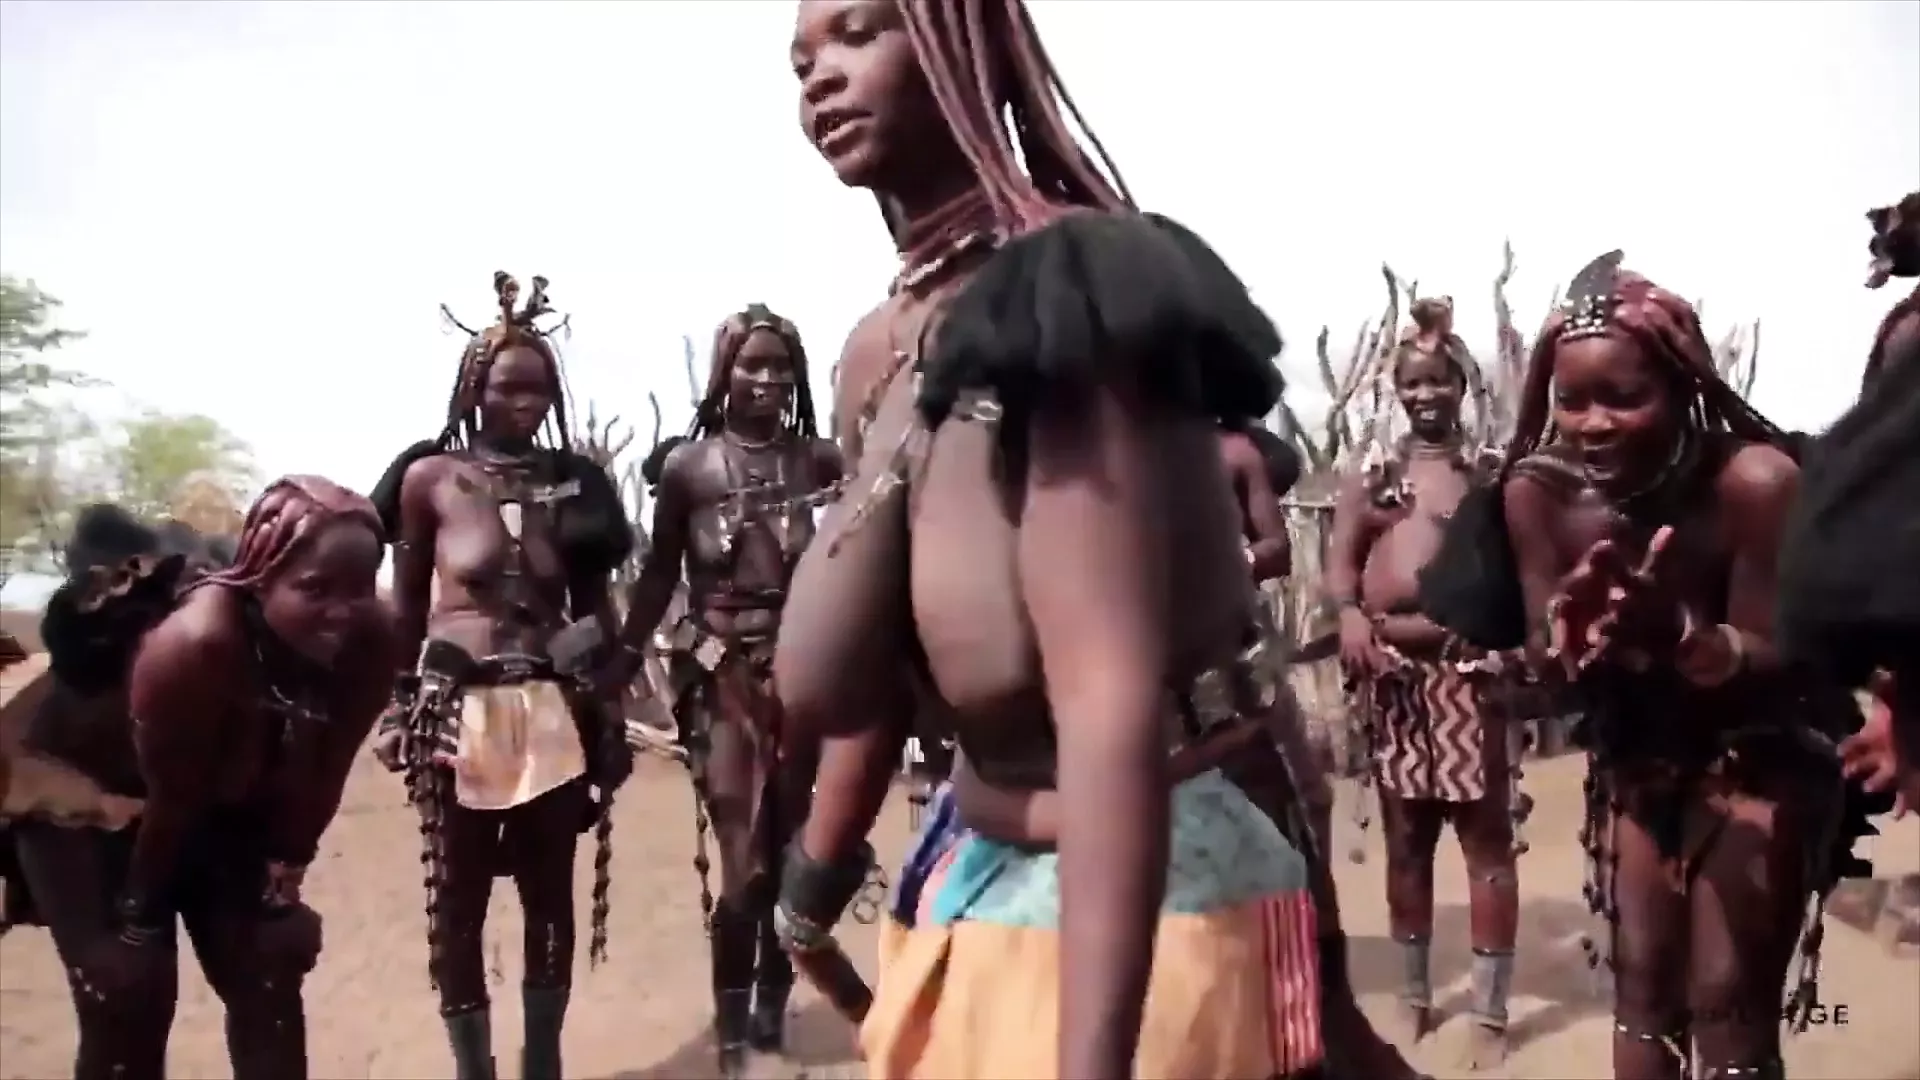 Tribal Big Tits Porn - African Himba Women Dance and Swing Their Saggy Tits Around | xHamster